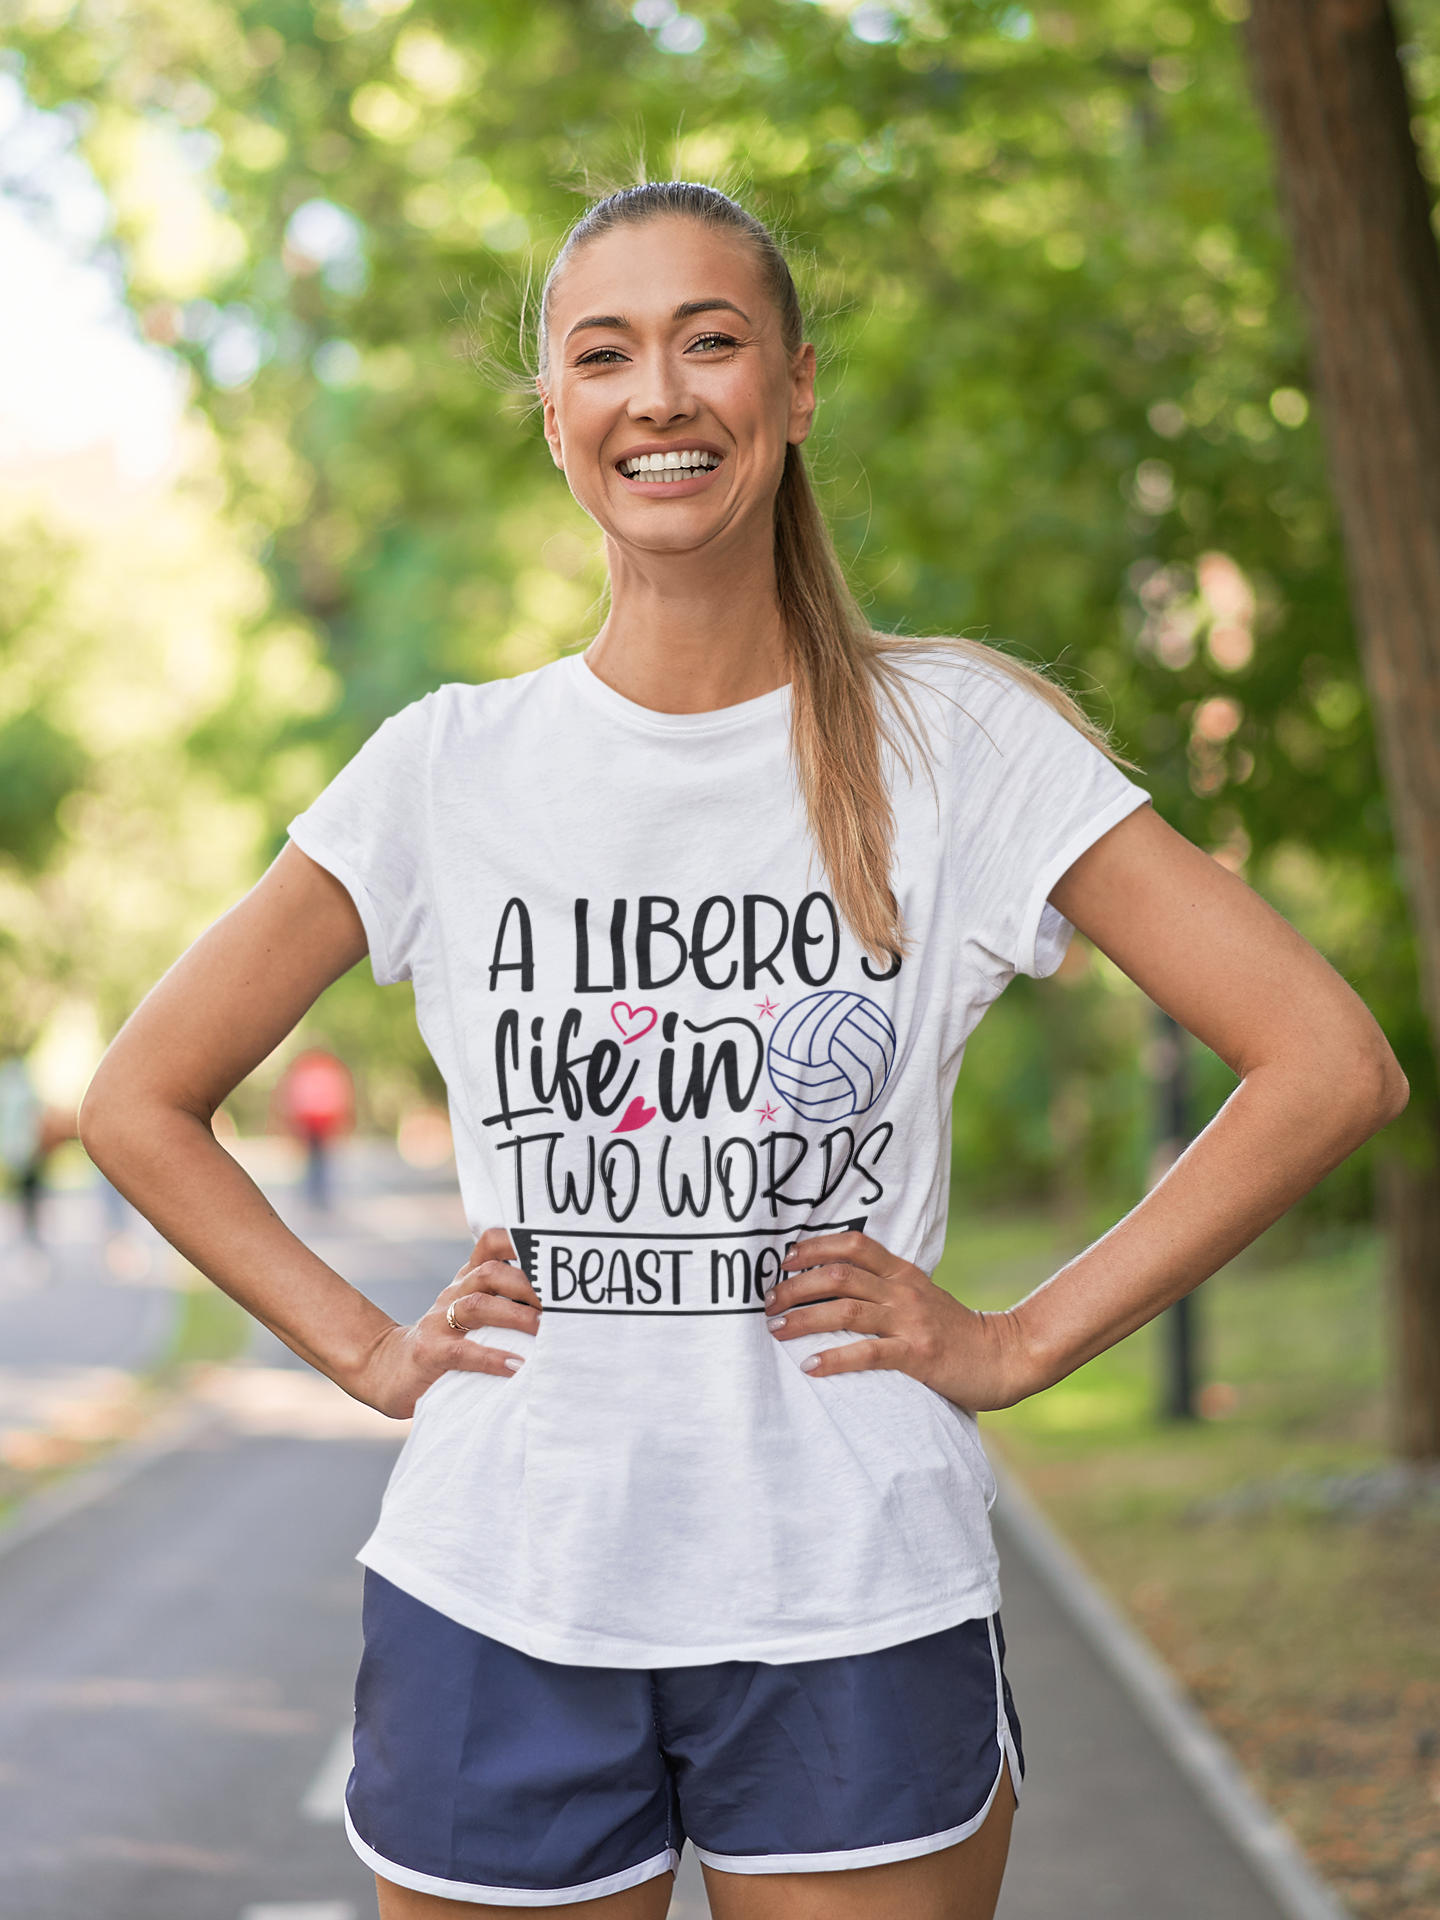 Your Volleyball tshirt By Volleybragswag - Shop The Coolest Volleyball Shirt Shop on ETSY. A Libero's Life in Two Words, Beast Mode by Volleybragswag.